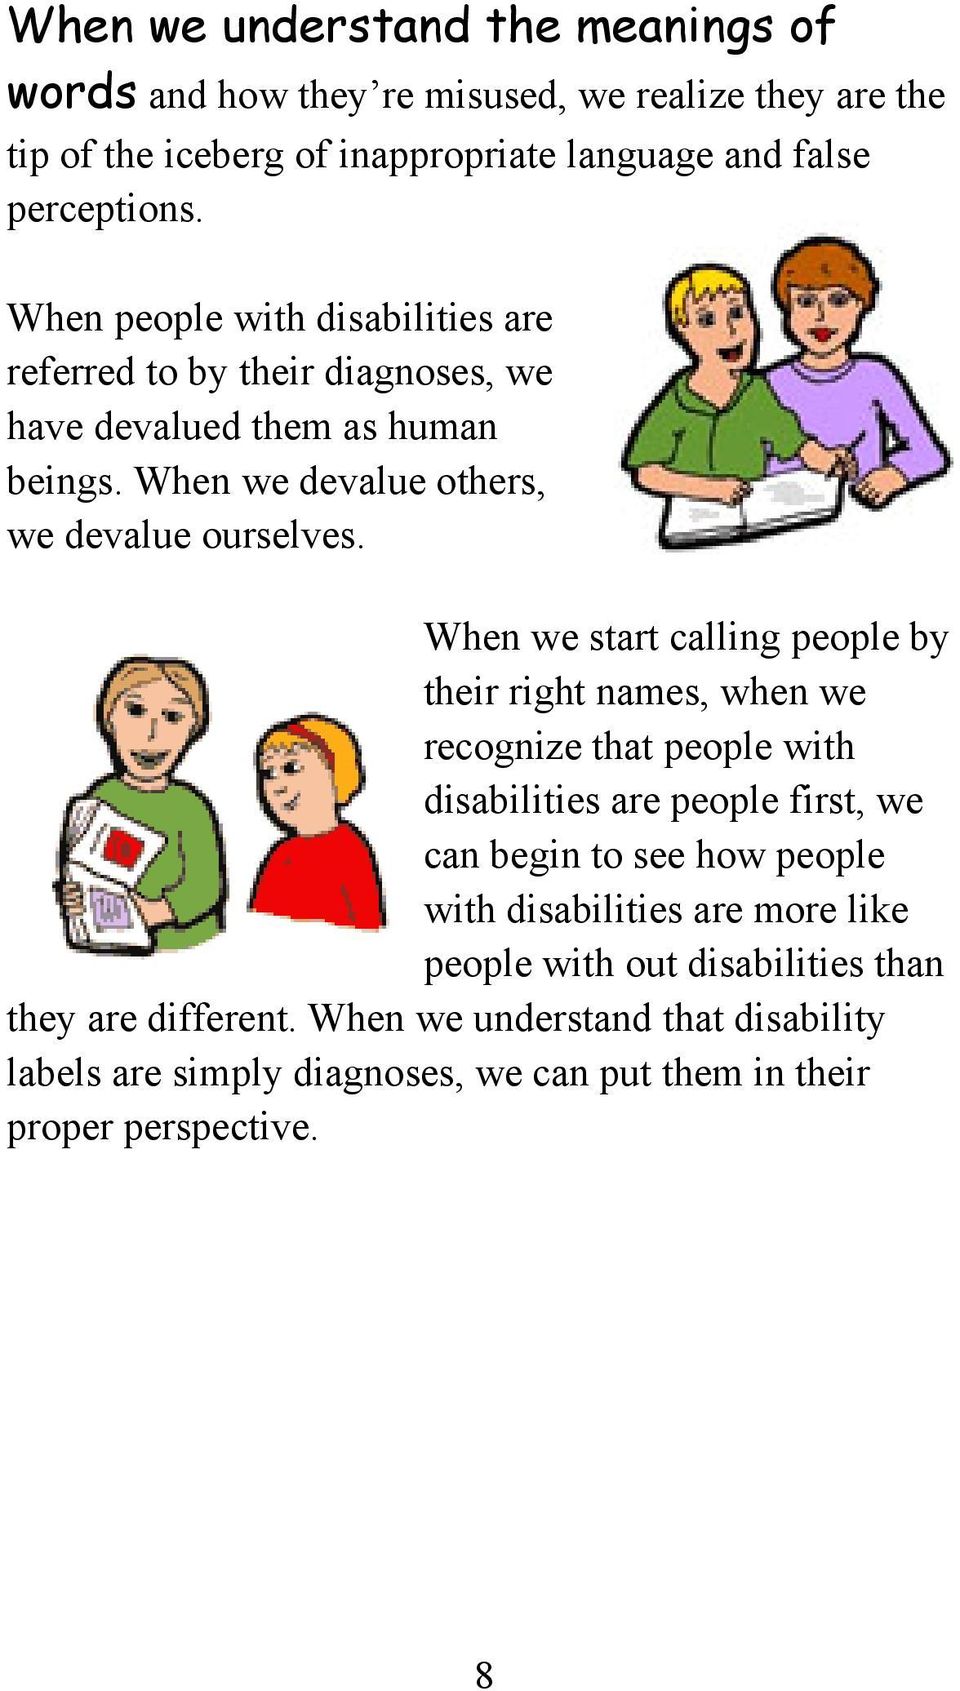 When we start calling people by their right names, when we recognize that people with disabilities are people first, we can begin to see how people with